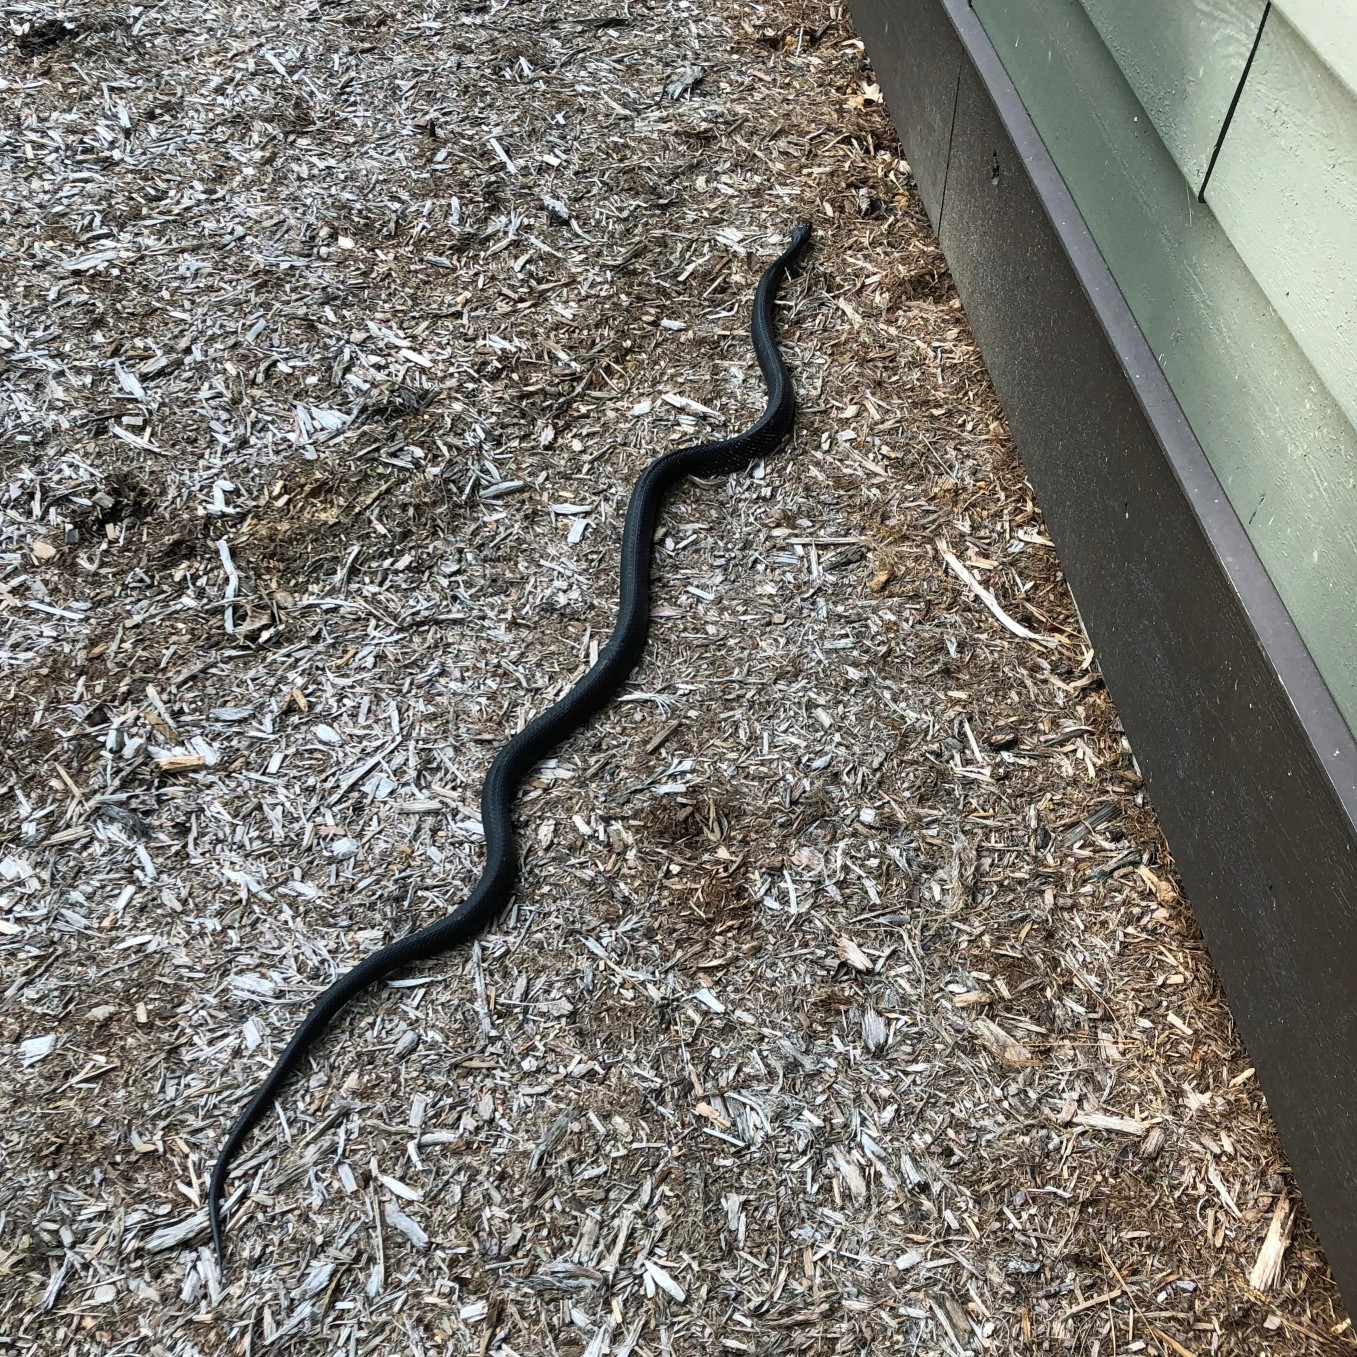 What Are The Risks Of Keeping Snakes Under Your House?